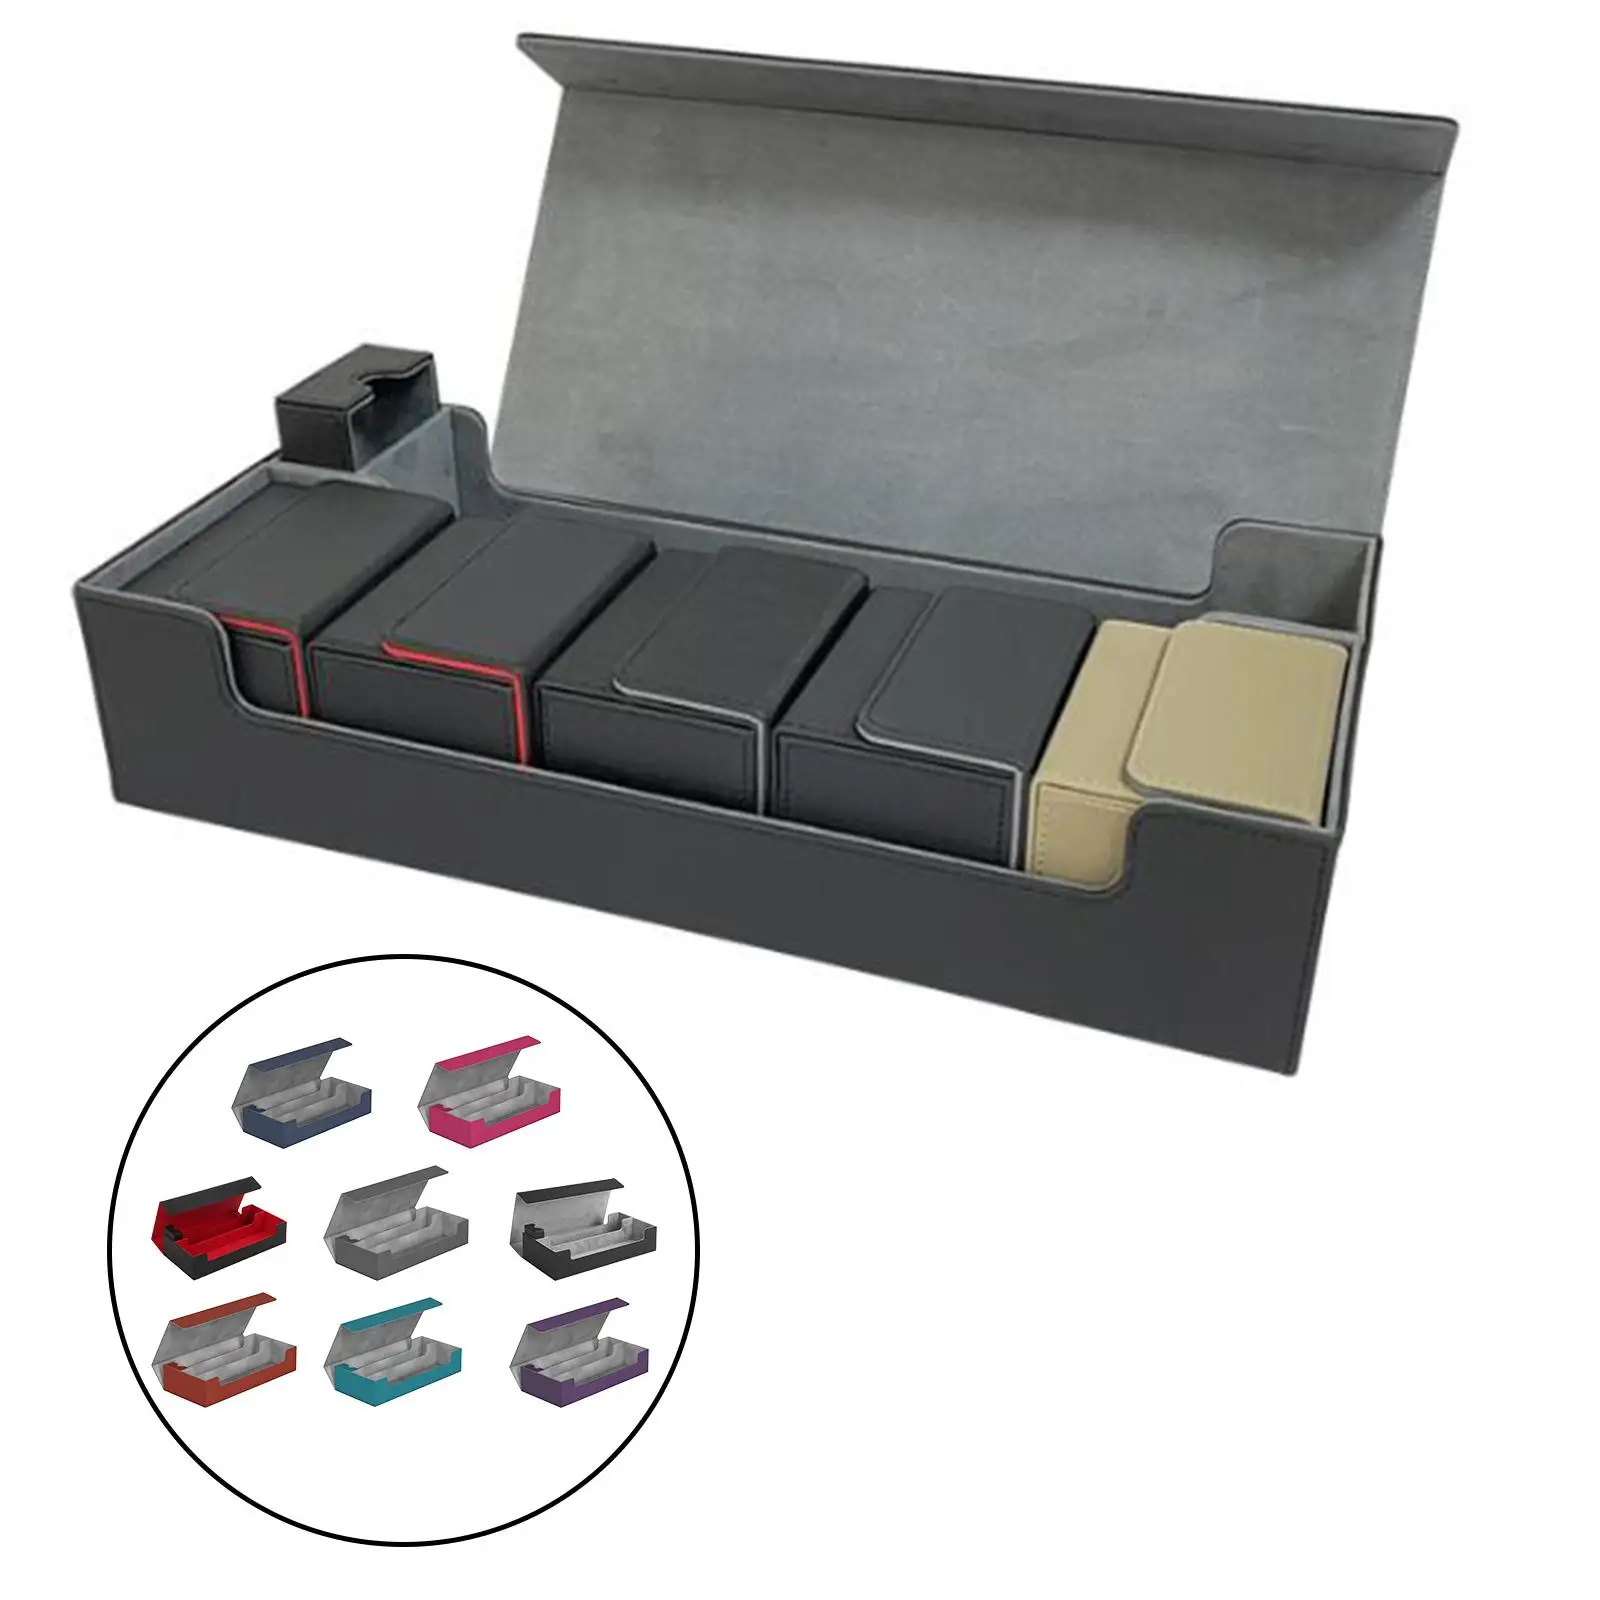 Premium Card Deck Box PU Leather Trading Card Games Large Size For 550+ Sleeved Cards Card Holder For Card Collections